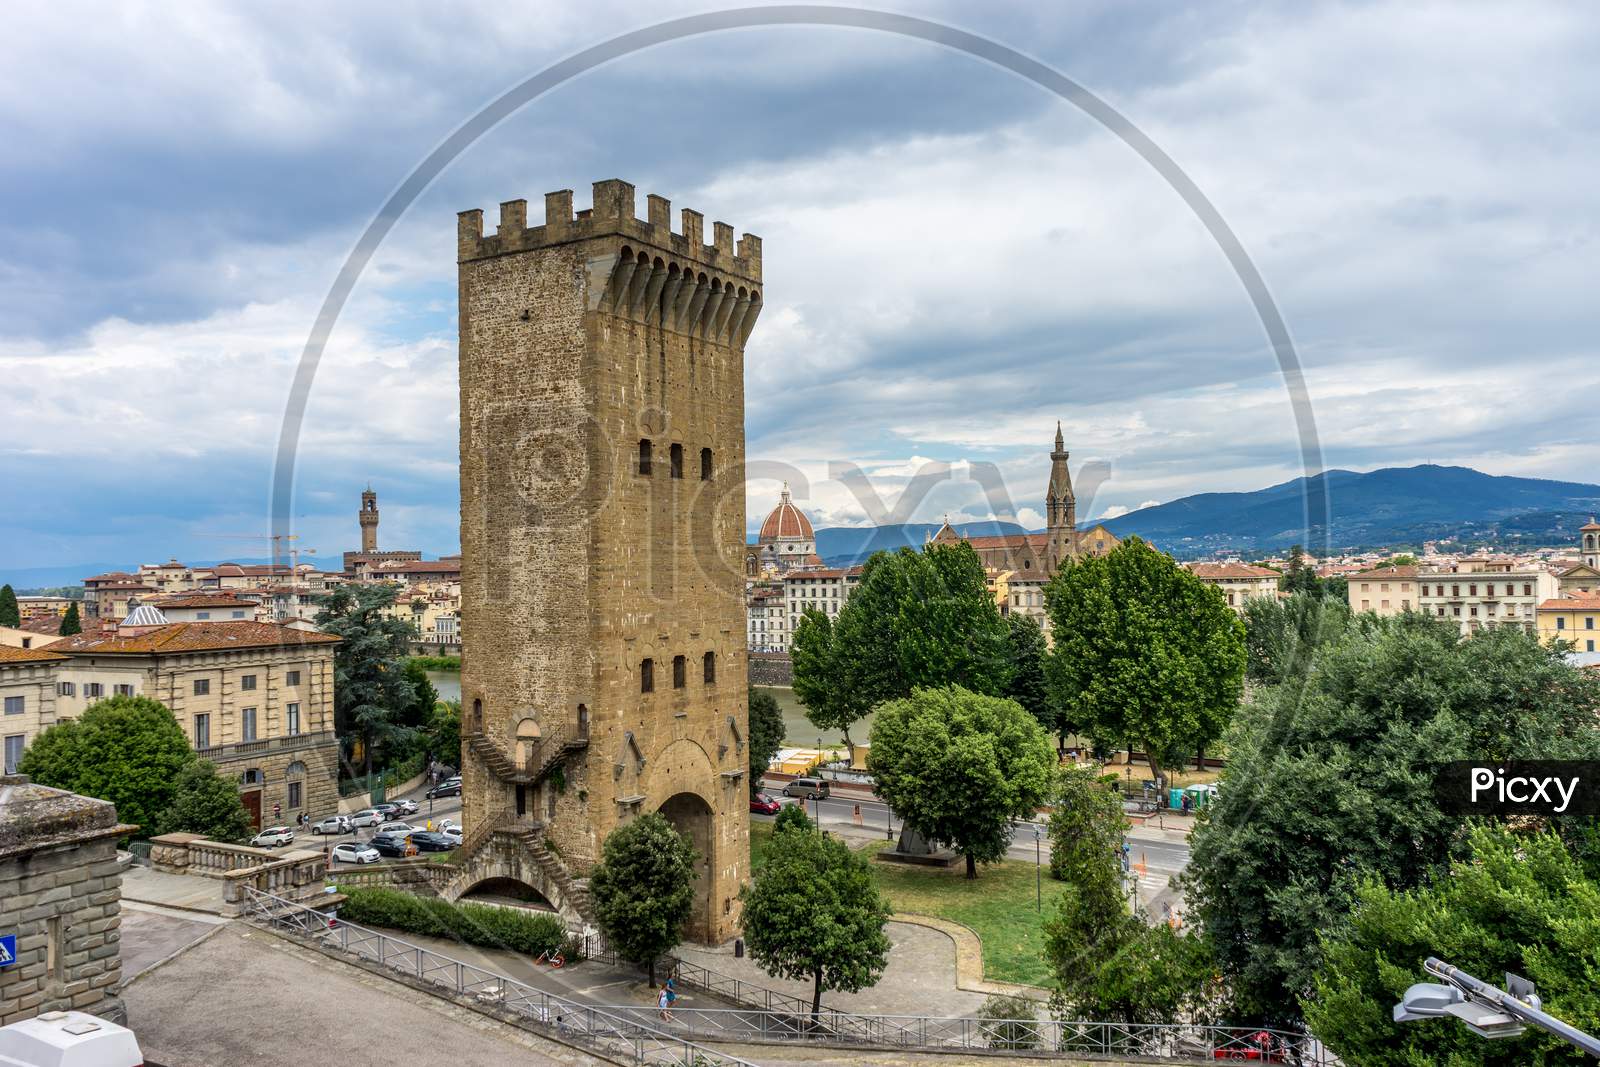 Florence, Italy - 25 June 2018: The City Gate Of San Niccolo In Florence, Italy